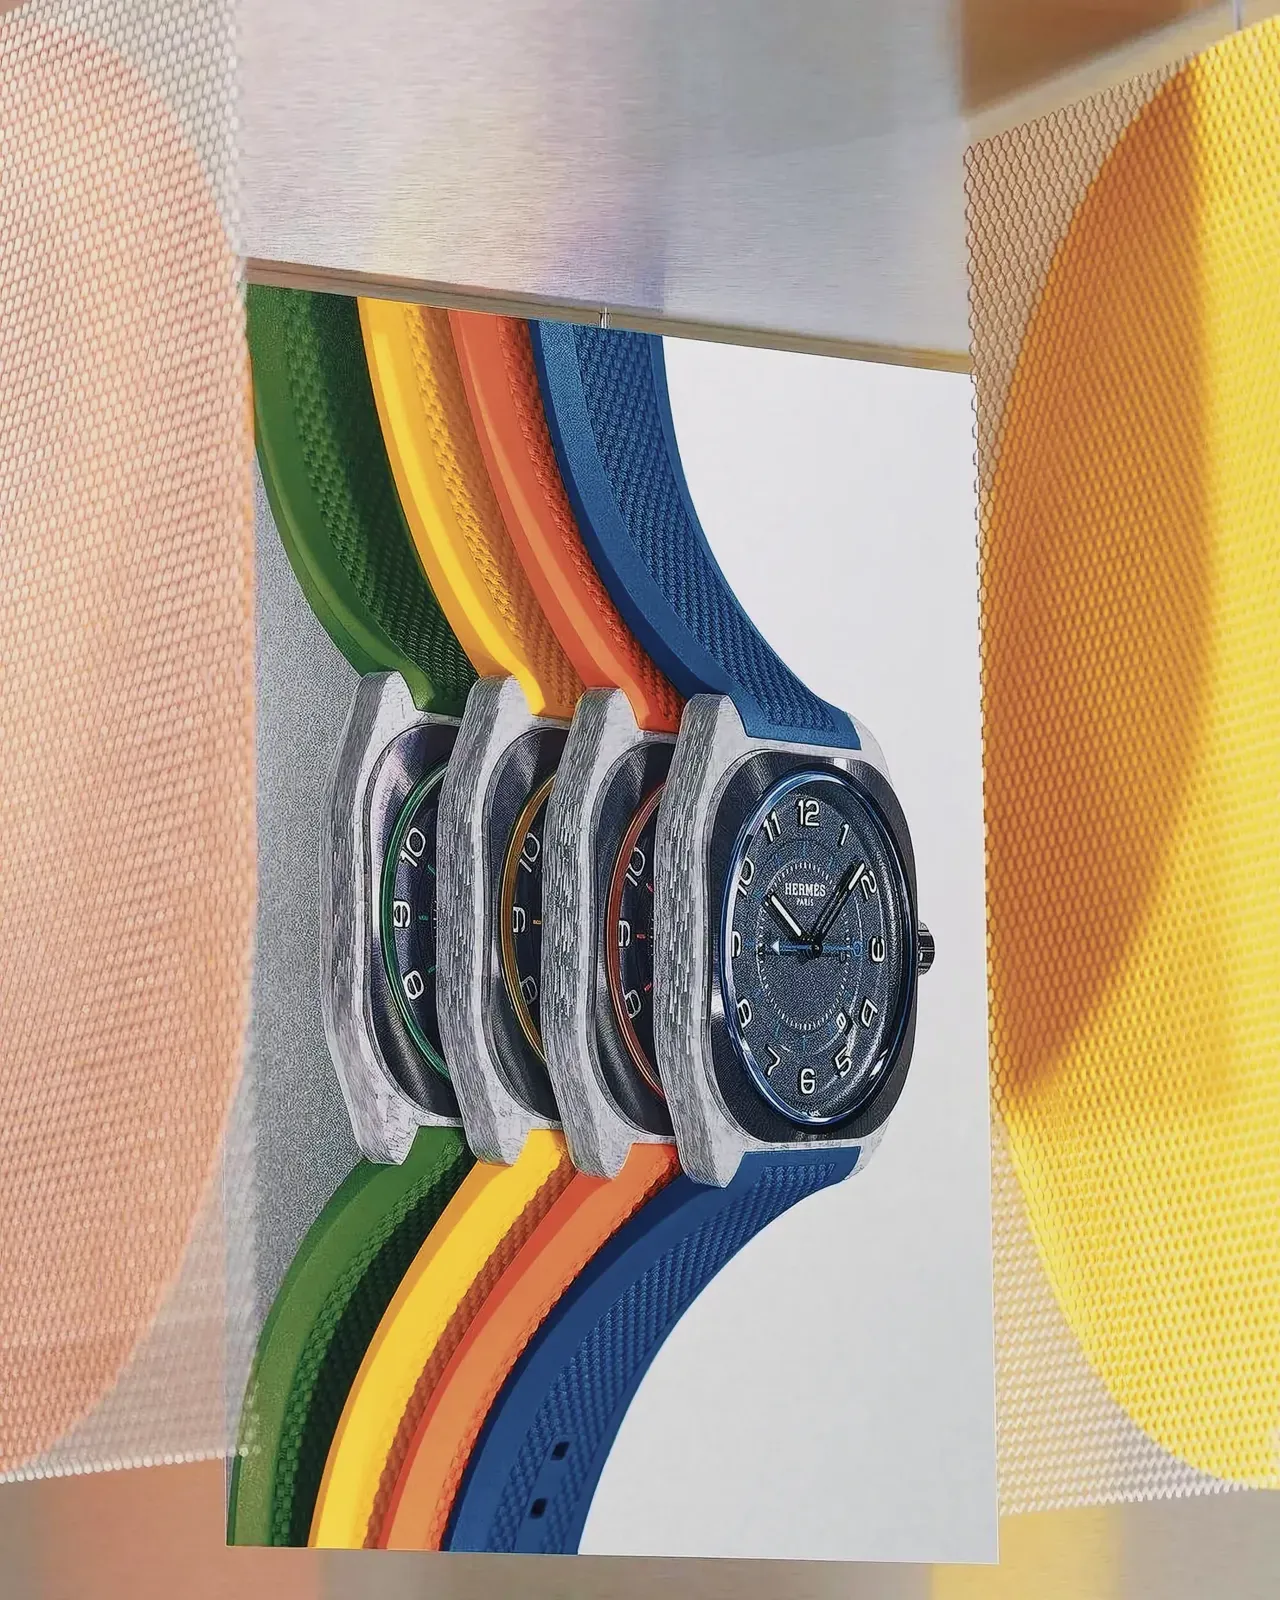 Vibrant Hermès H08 watches in an array of colors